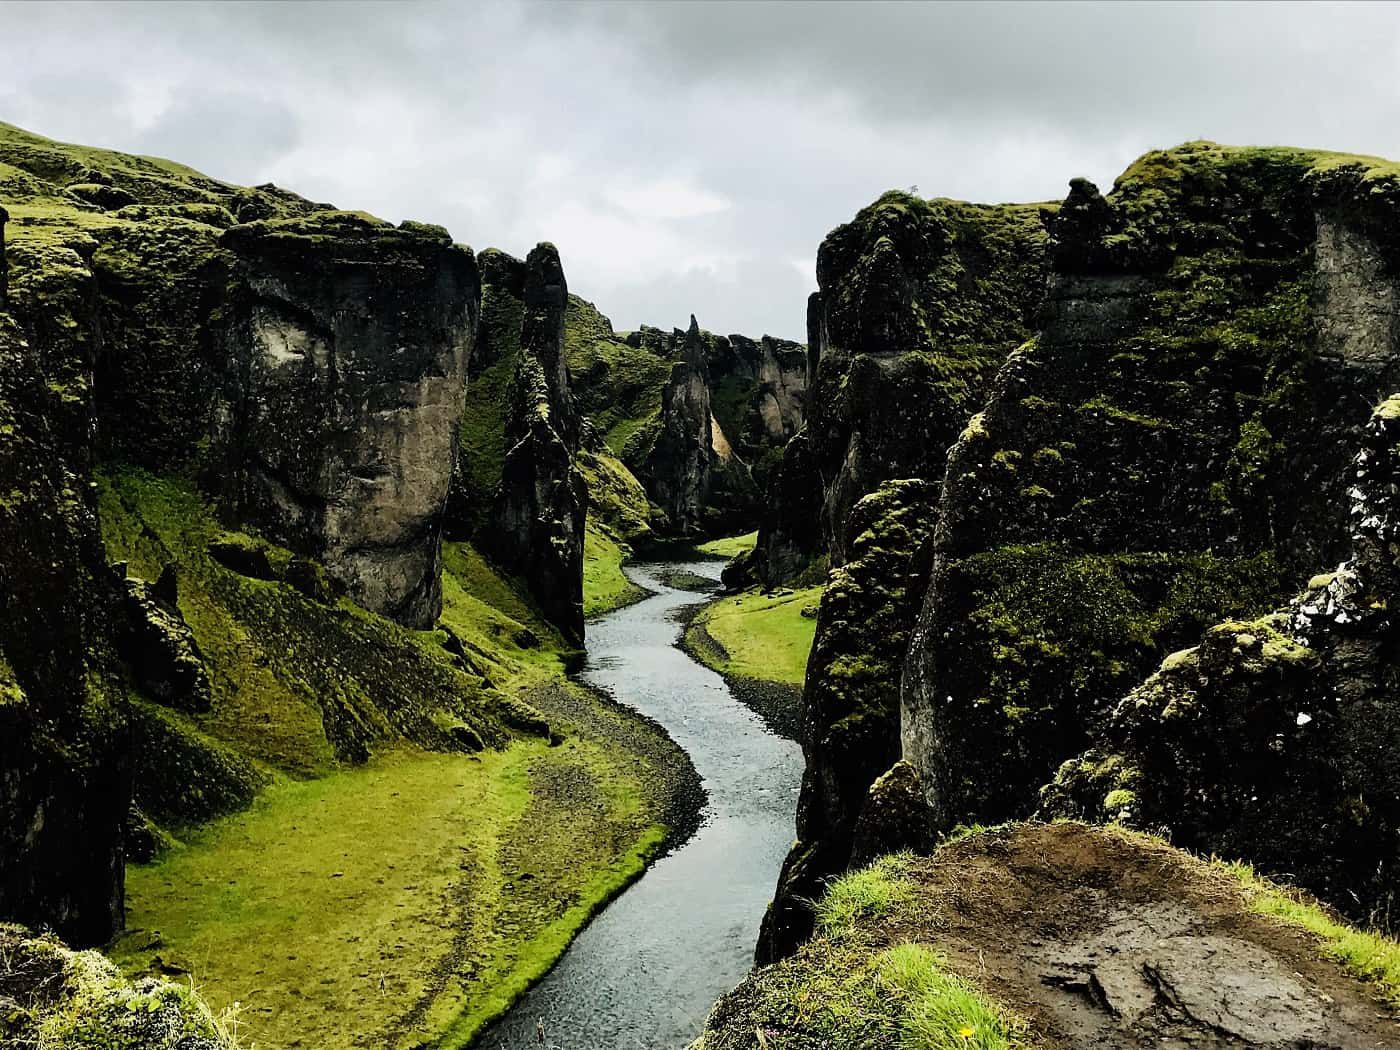 POEMS BY ALICE SHI KEMBEL: 4 pieces of poetry inspired by a trip to Iceland